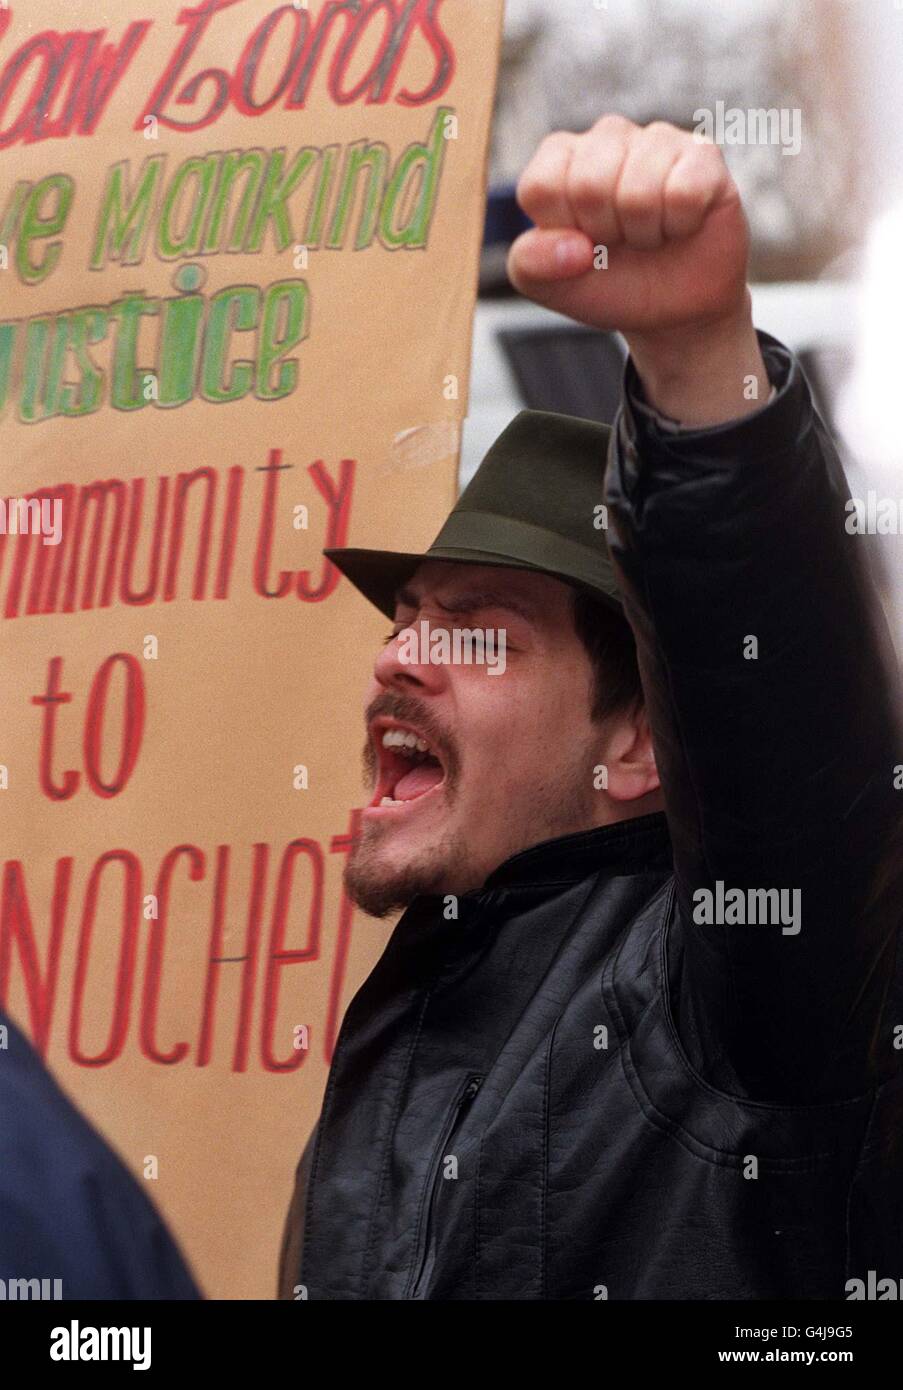 Protesters gather outside the Houses of Parliament in London awaiting the fate of the ex-Chilean Head-of-State General Pinochet, whose future is to be decided by the House of Lords. Stock Photo